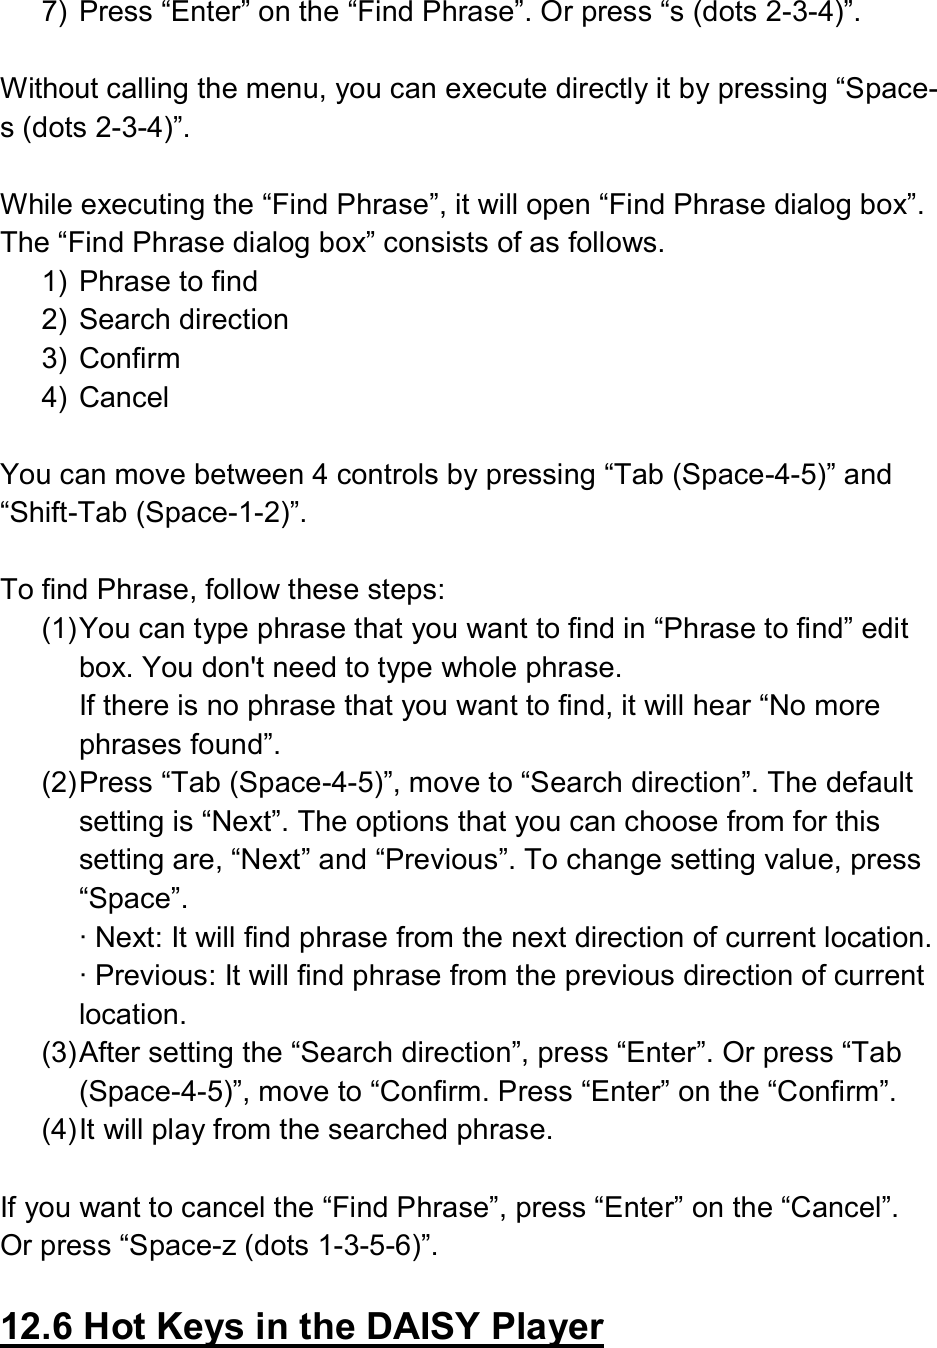  7)  Press “Enter” on the “Find Phrase”. Or press “s (dots 2-3-4)”.  Without calling the menu, you can execute directly it by pressing “Space-s (dots 2-3-4)”.  While executing the “Find Phrase”, it will open “Find Phrase dialog box”. The “Find Phrase dialog box” consists of as follows. 1)  Phrase to find 2)  Search direction 3)  Confirm 4)  Cancel  You can move between 4 controls by pressing “Tab (Space-4-5)” and “Shift-Tab (Space-1-2)”.  To find Phrase, follow these steps: (1) You can type phrase that you want to find in “Phrase to find” edit box. You don&apos;t need to type whole phrase. If there is no phrase that you want to find, it will hear “No more phrases found”. (2) Press “Tab (Space-4-5)”, move to “Search direction”. The default setting is “Next”. The options that you can choose from for this setting are, “Next” and “Previous”. To change setting value, press “Space”. ∙ Next: It will find phrase from the next direction of current location. ∙ Previous: It will find phrase from the previous direction of current location. (3) After setting the “Search direction”, press “Enter”. Or press “Tab (Space-4-5)”, move to “Confirm. Press “Enter” on the “Confirm”. (4) It will play from the searched phrase.  If you want to cancel the “Find Phrase”, press “Enter” on the “Cancel”. Or press “Space-z (dots 1-3-5-6)”.  12.6 Hot Keys in the DAISY Player  